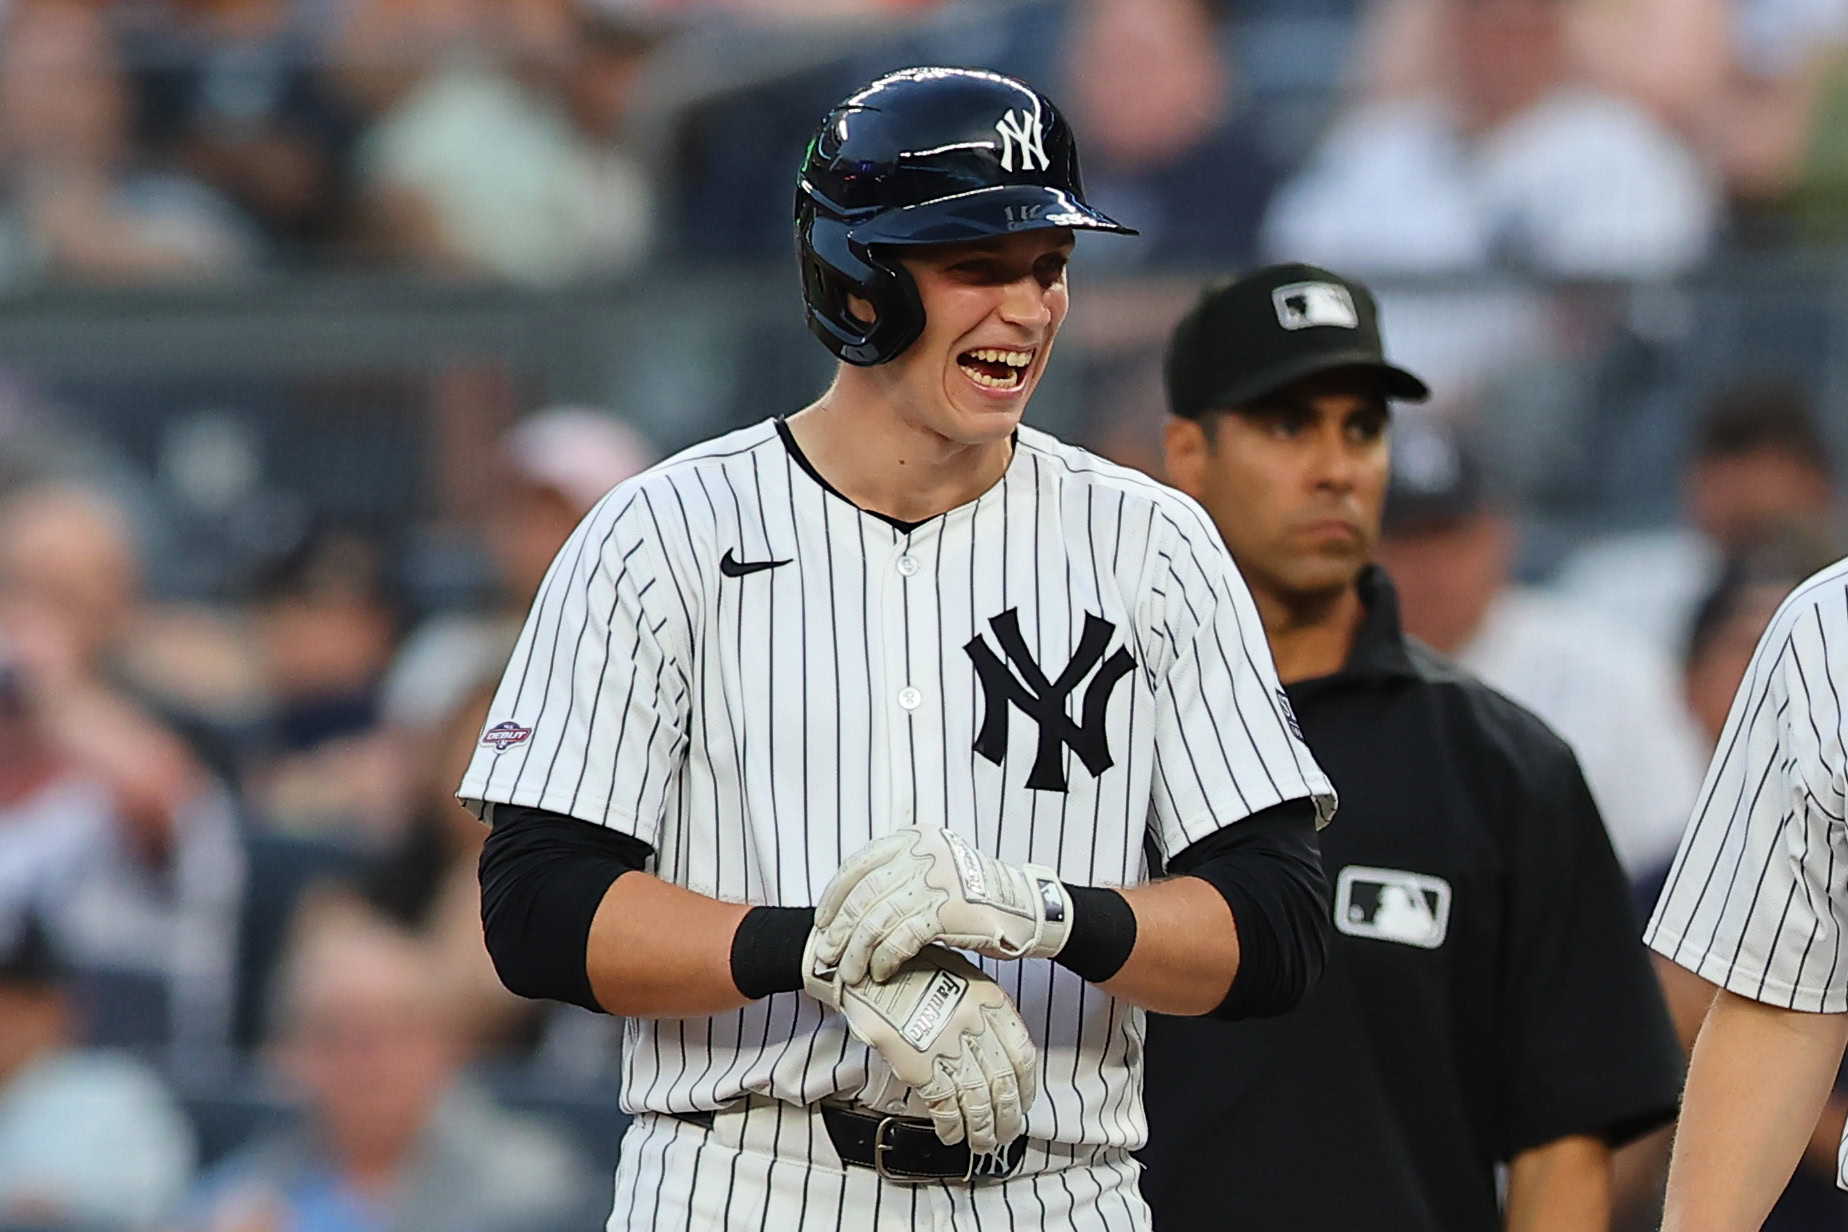 Ben Rice Debut: The Yankees 1B reacts to his first career hit.